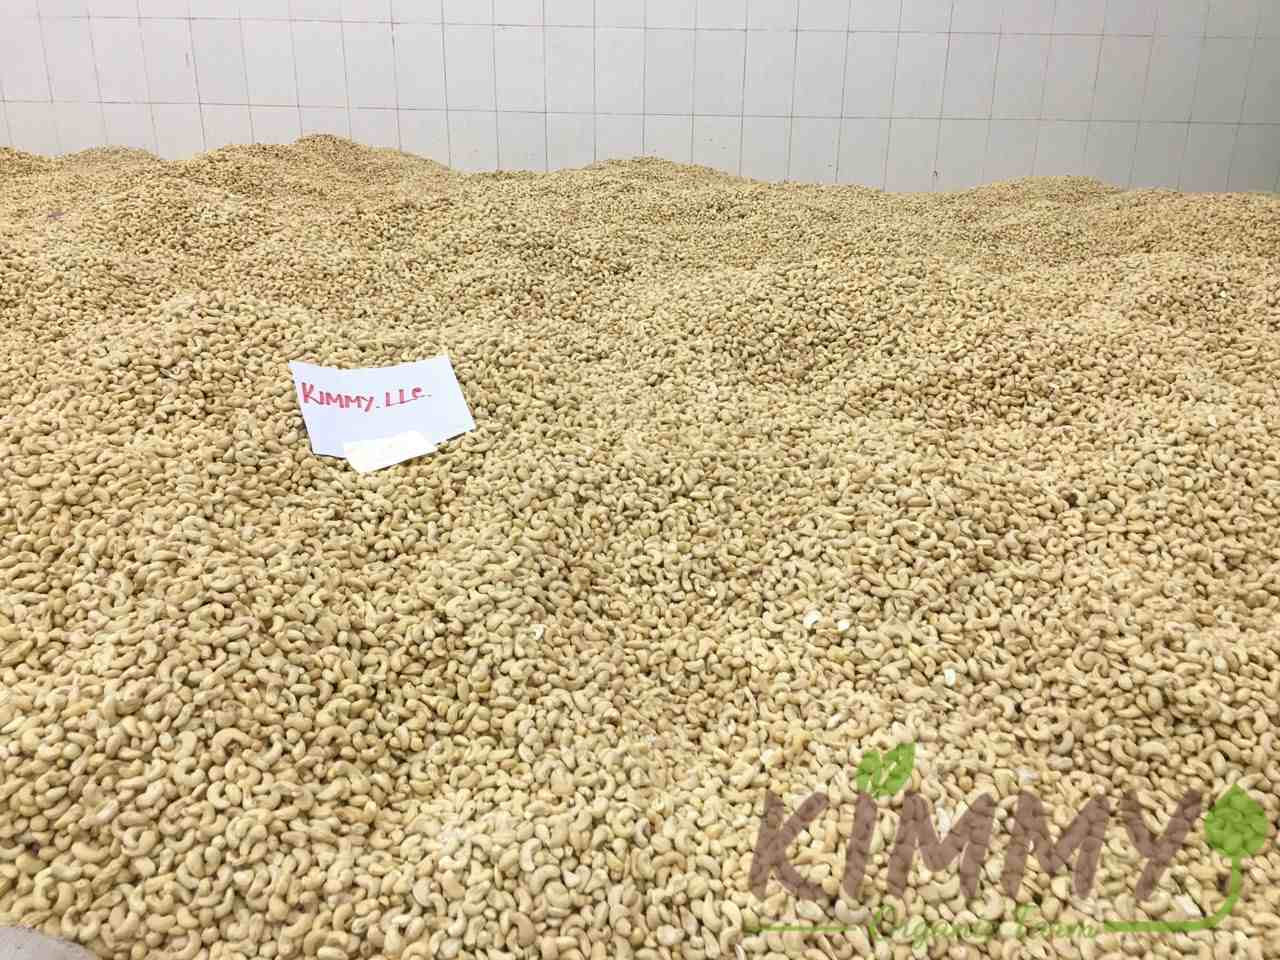 Vietnam W240 Cashew Nut White Whole Cashews High Quality Ready For Export Raw Image Of W240 From Our Cashew Factory! 3